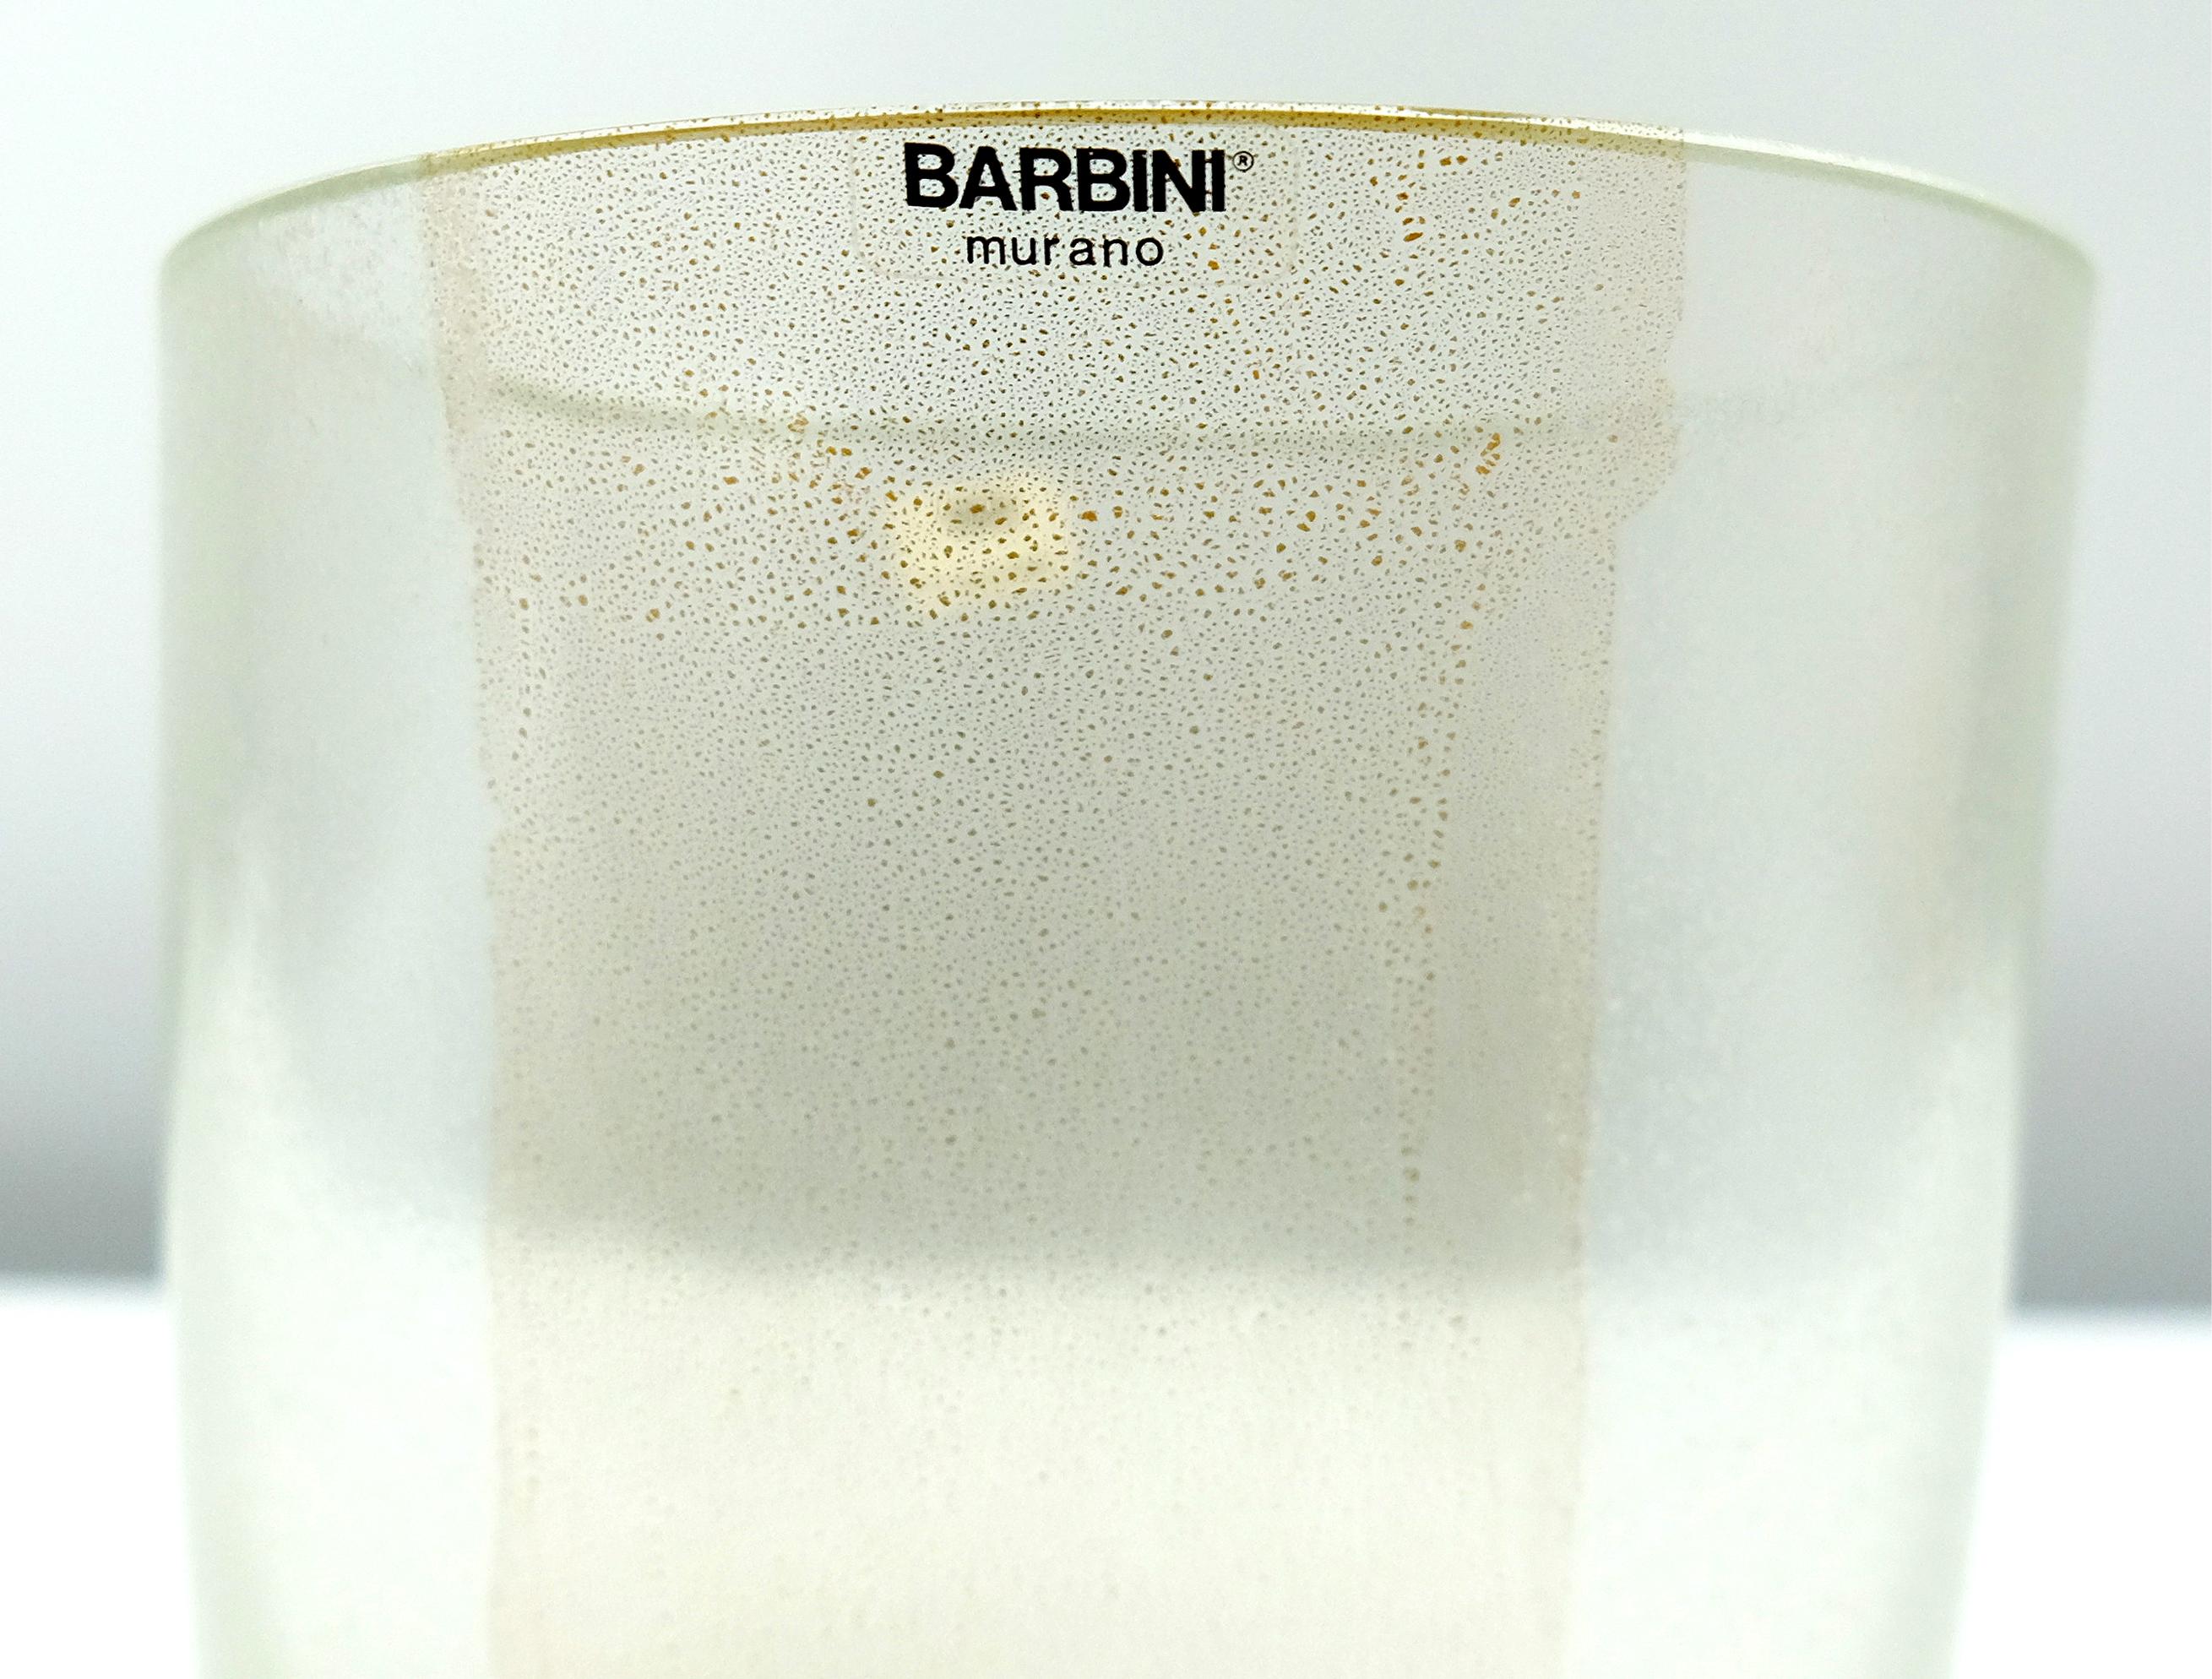  Murano Glass Vase with Infused Gold by Barbini, Italy, Asymmetric In New Condition For Sale In Miami, FL